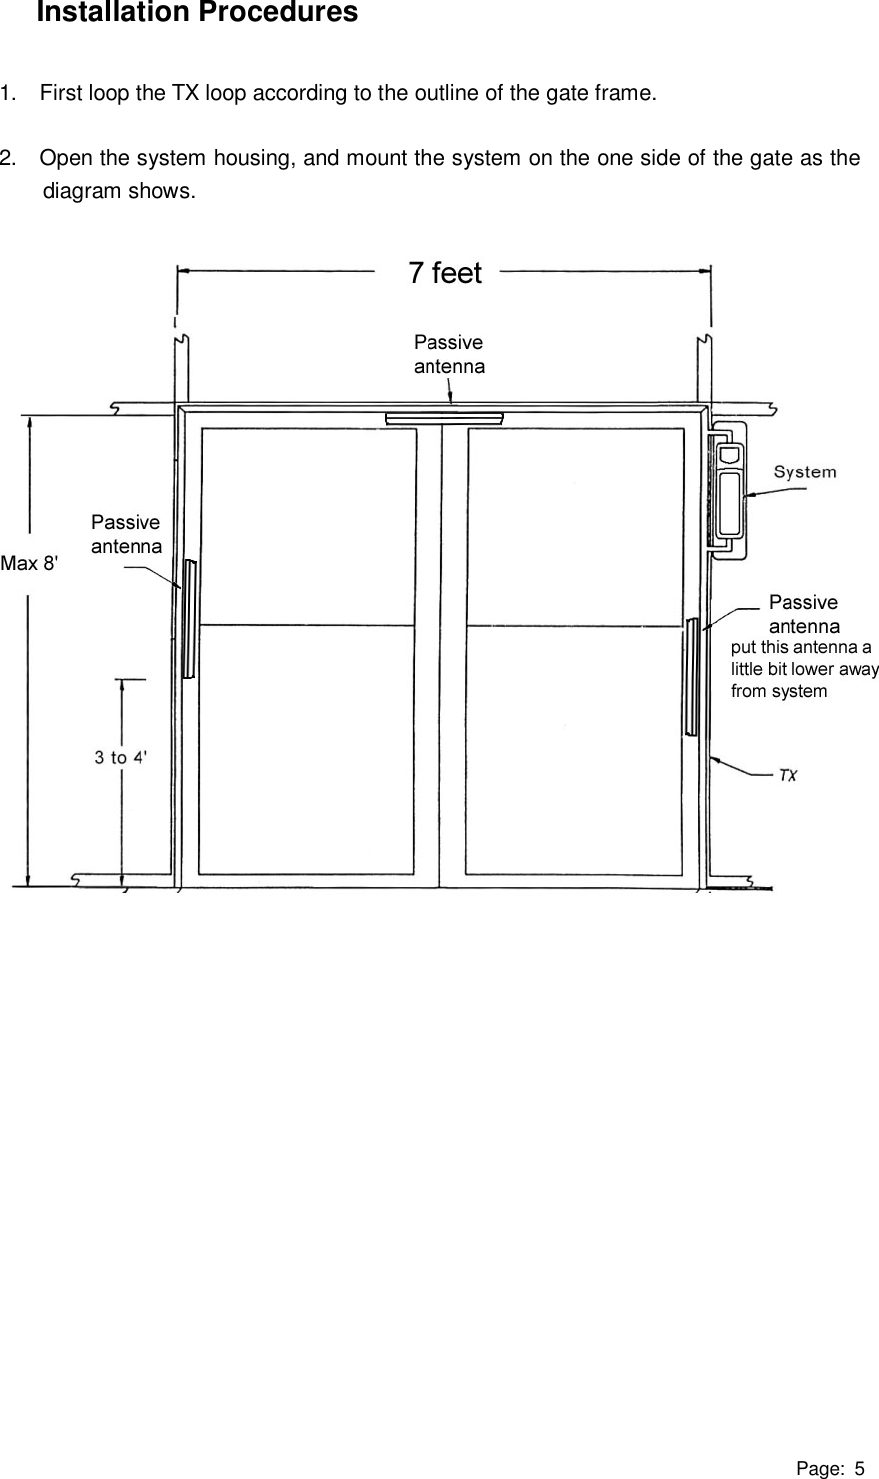 Page: 5 Installation Procedures  1.  First loop the TX loop according to the outline of the gate frame.  2.  Open the system housing, and mount the system on the one side of the gate as the diagram shows.               